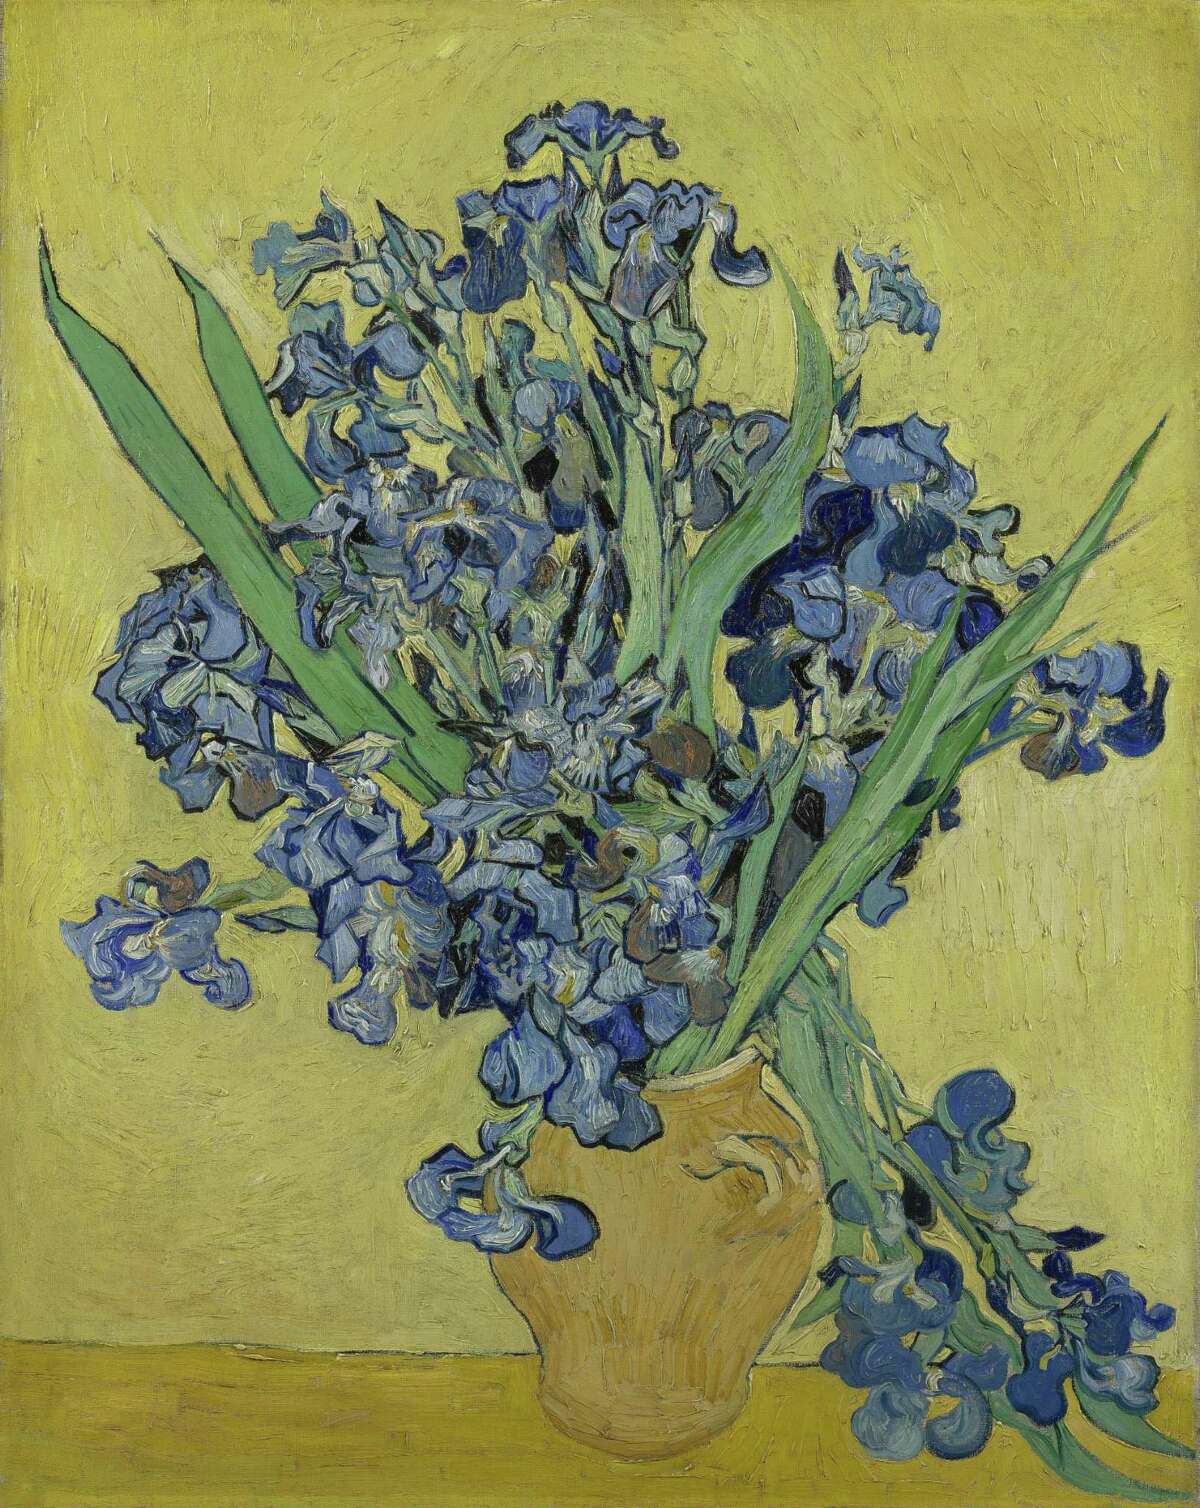 "Irises" was among 50 masterpieces in "Vincent van Gogh: His Life in Art” at the Museum of Fine Arts, Houston.